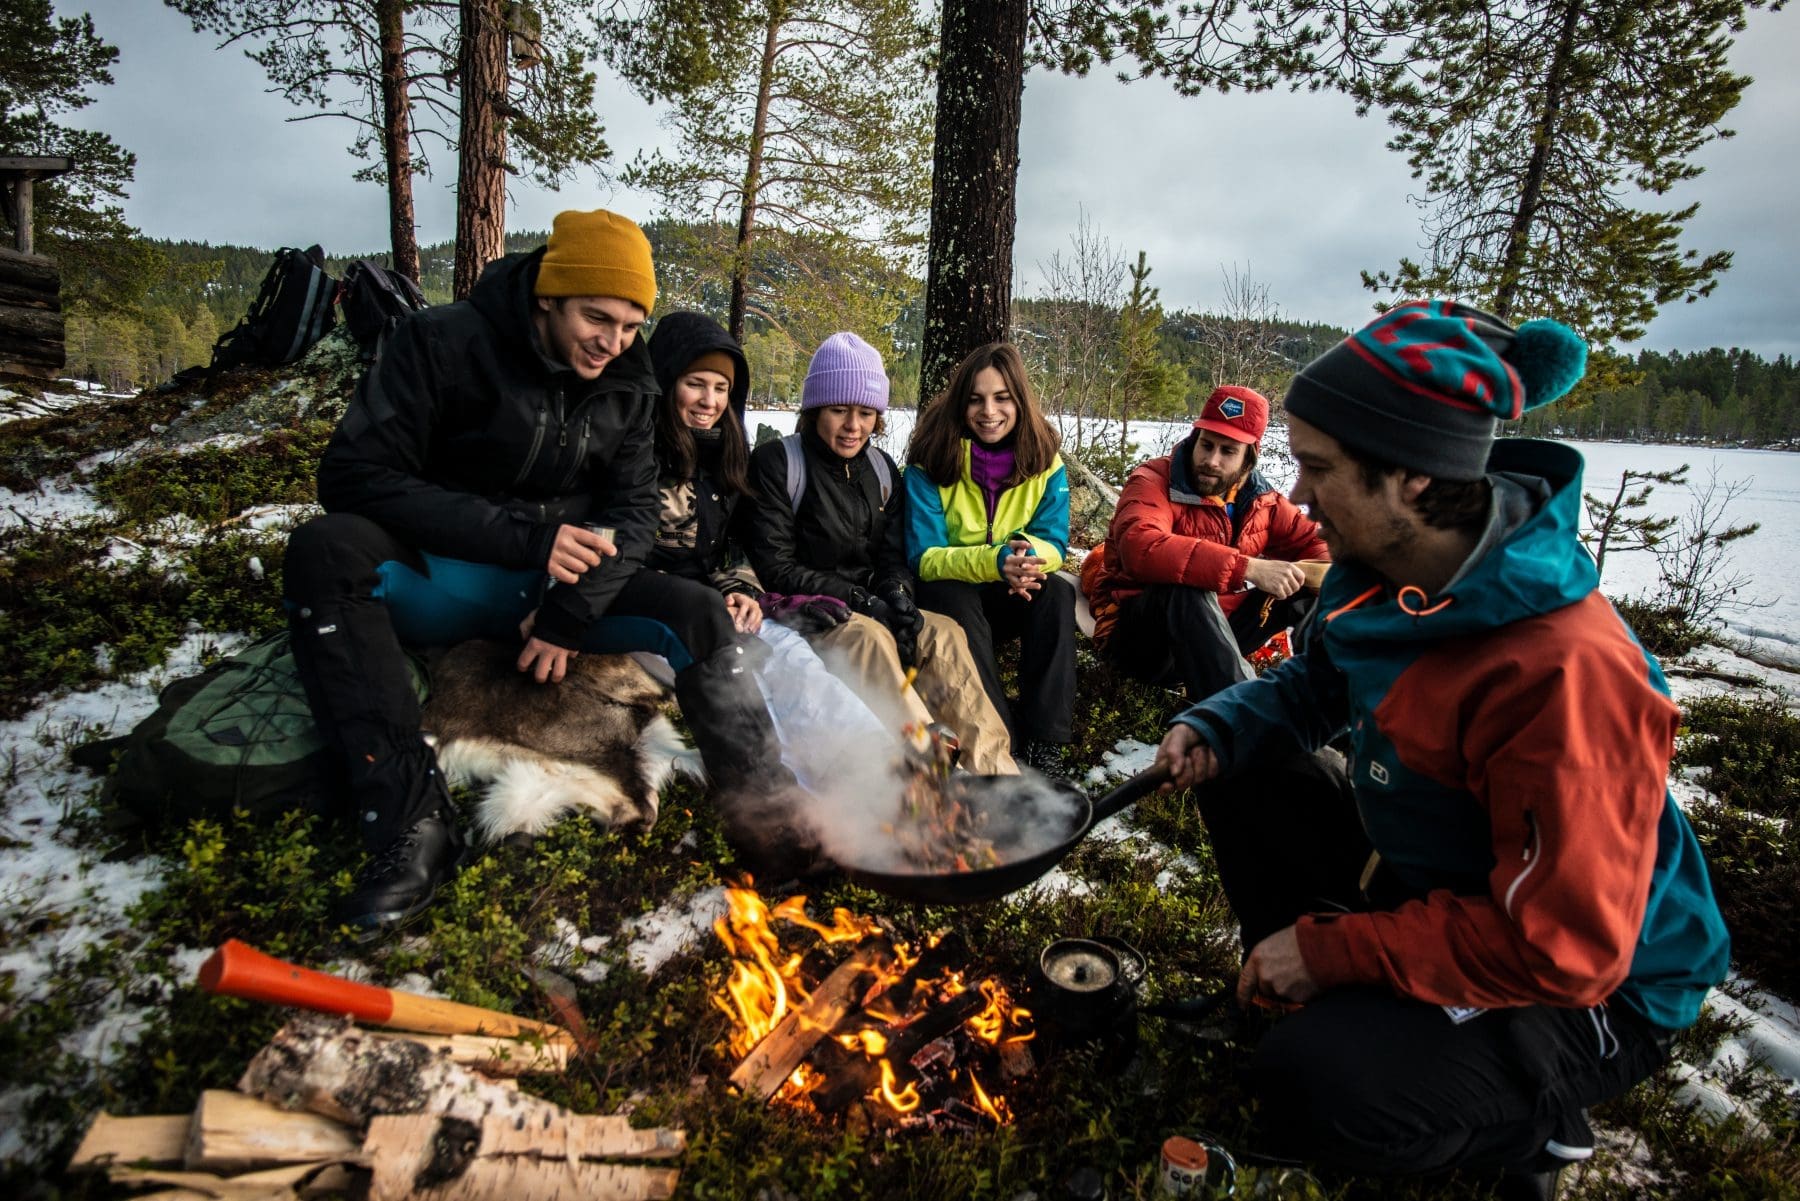 Guide and chef making an outdoor lunch for guests in Sweden. Copyright Slow Adventure Ltd